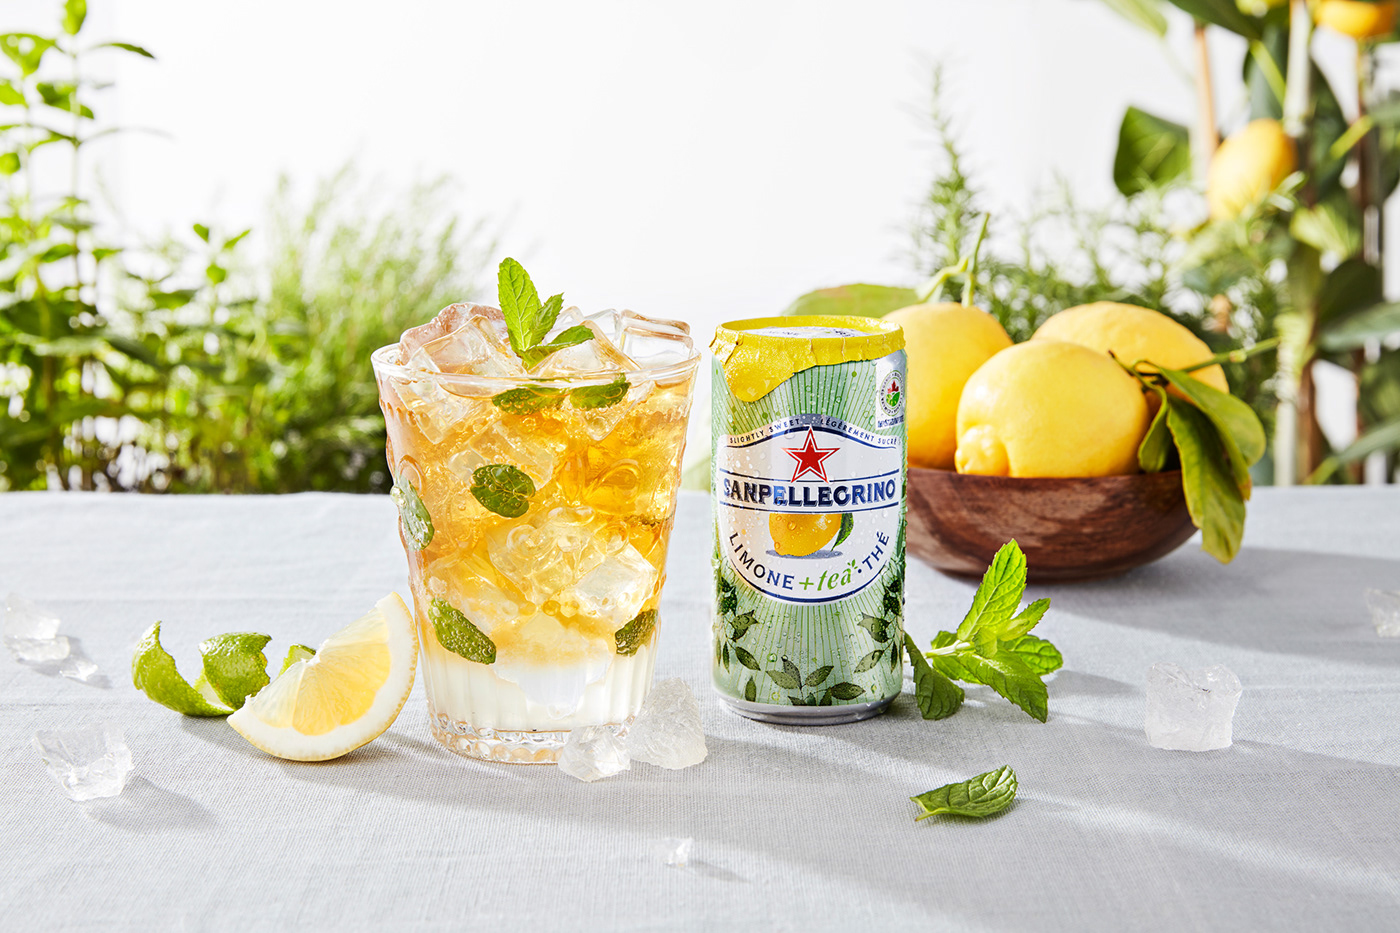 food photography can cocktail beverage culinary art san pellegrino food and beverage Fruit fresh summer